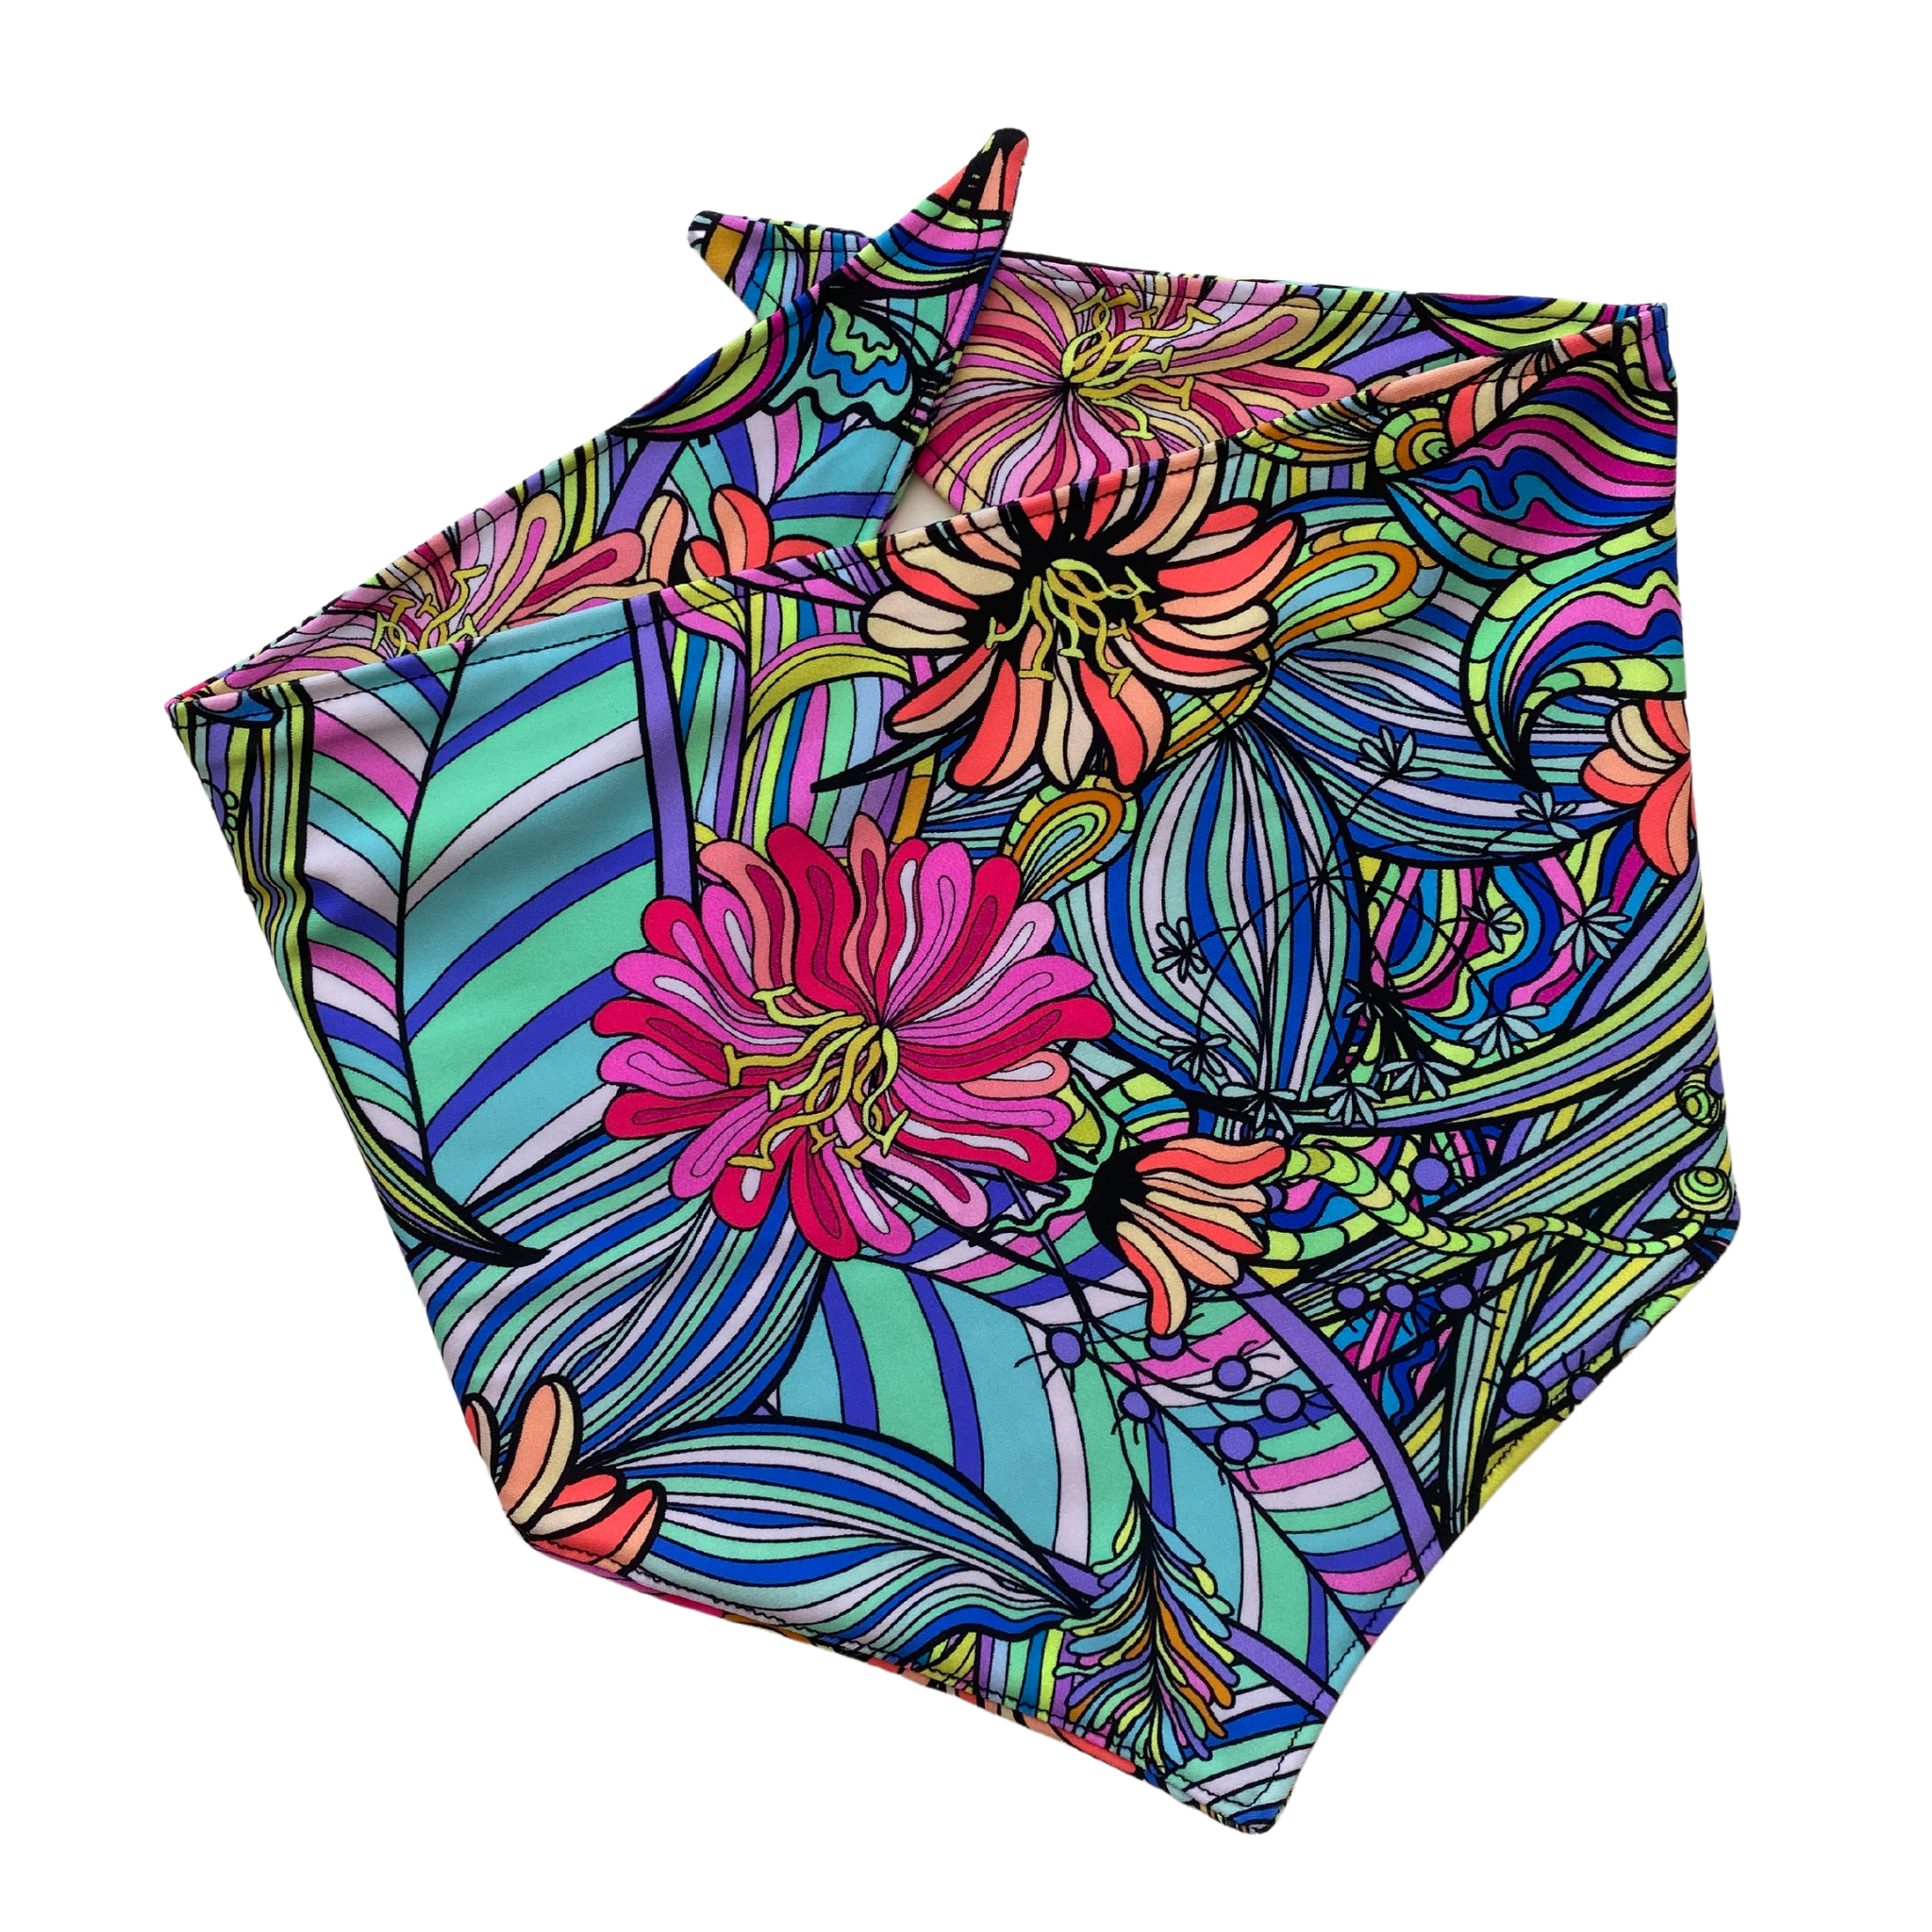 Close up picture of the retro swim scARF (cooling bandana for dogs). Its bold and colorful floral print will make your pet stand out at the beach or by the pool. Pipevine Designs